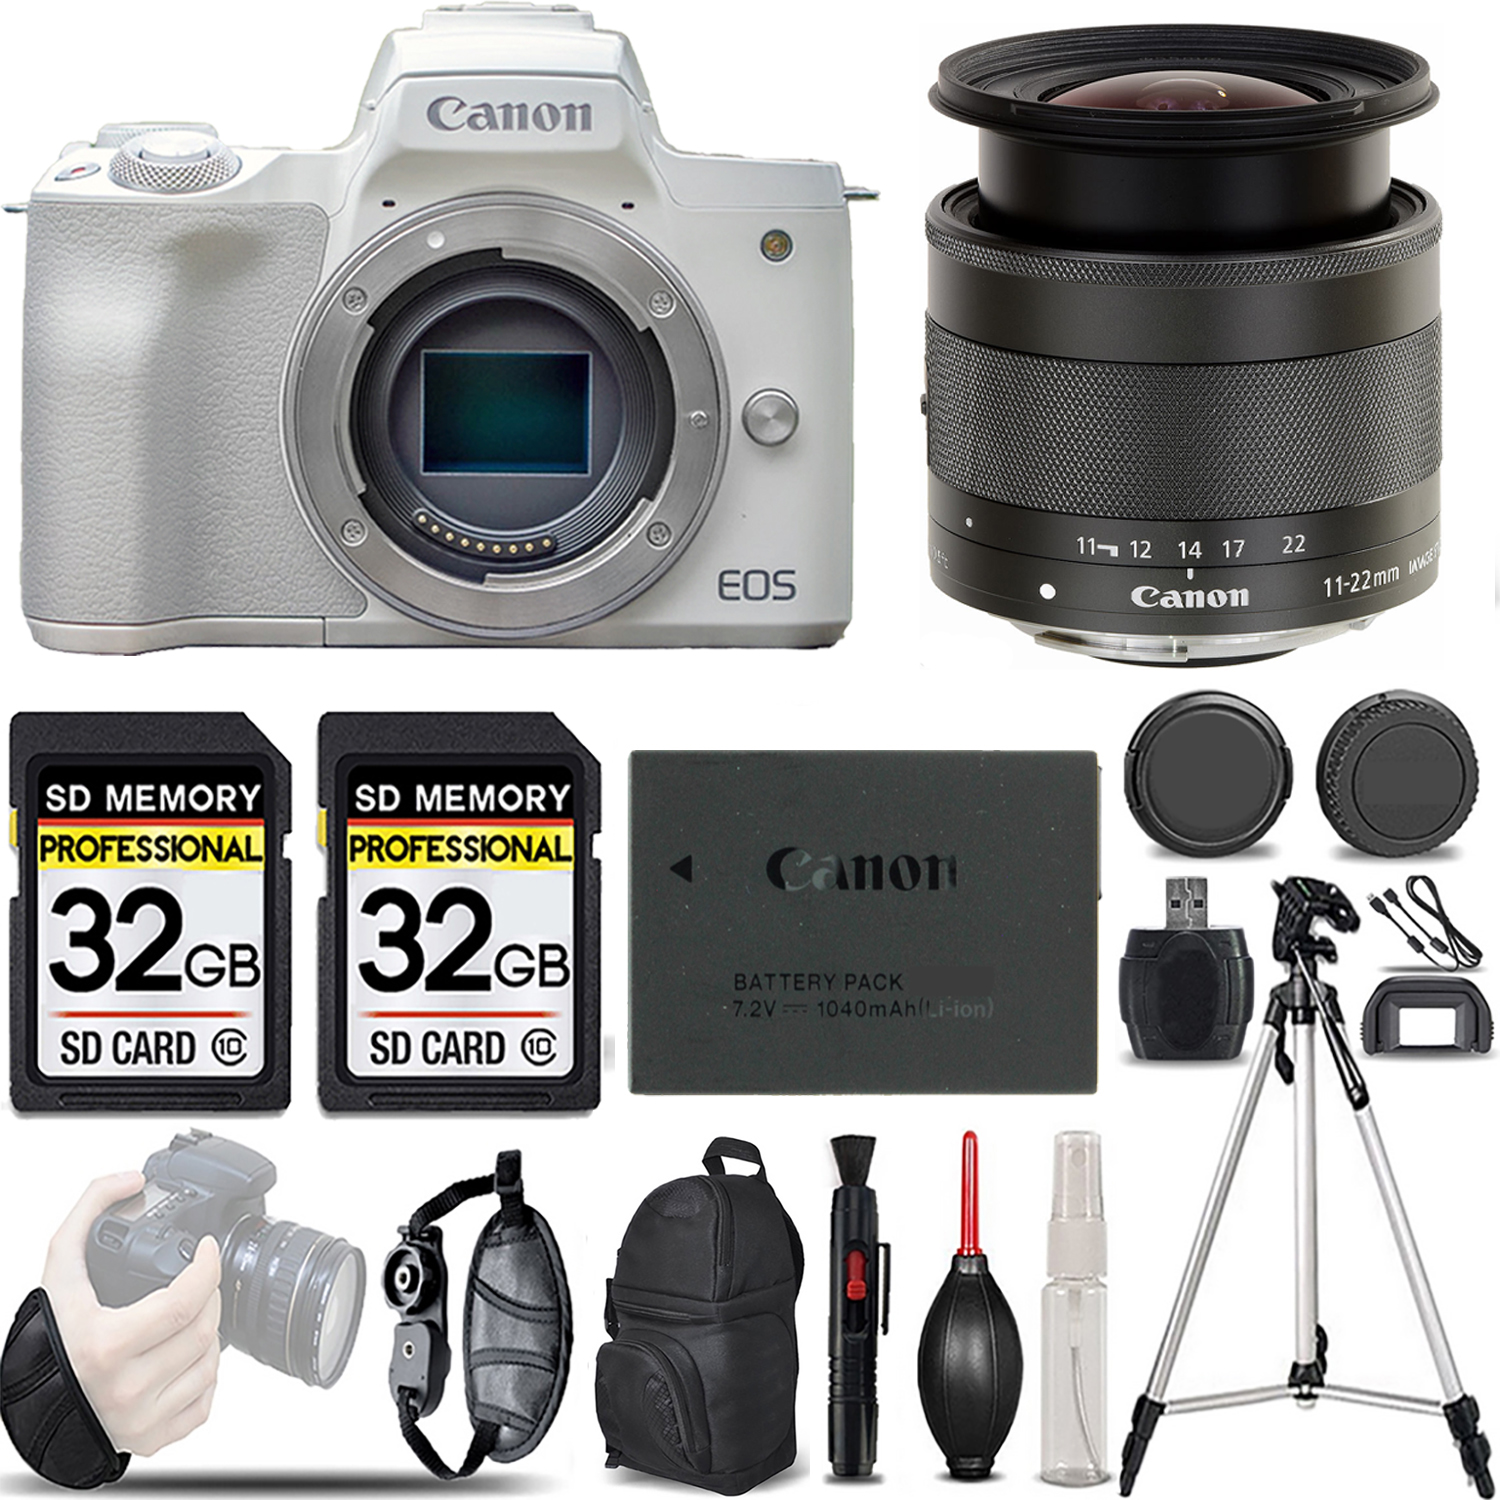 EOS M50 Mark II Camera (White) + 11-22mm f/4-5.6 IS STM Lens - LOADED KIT *FREE SHIPPING*